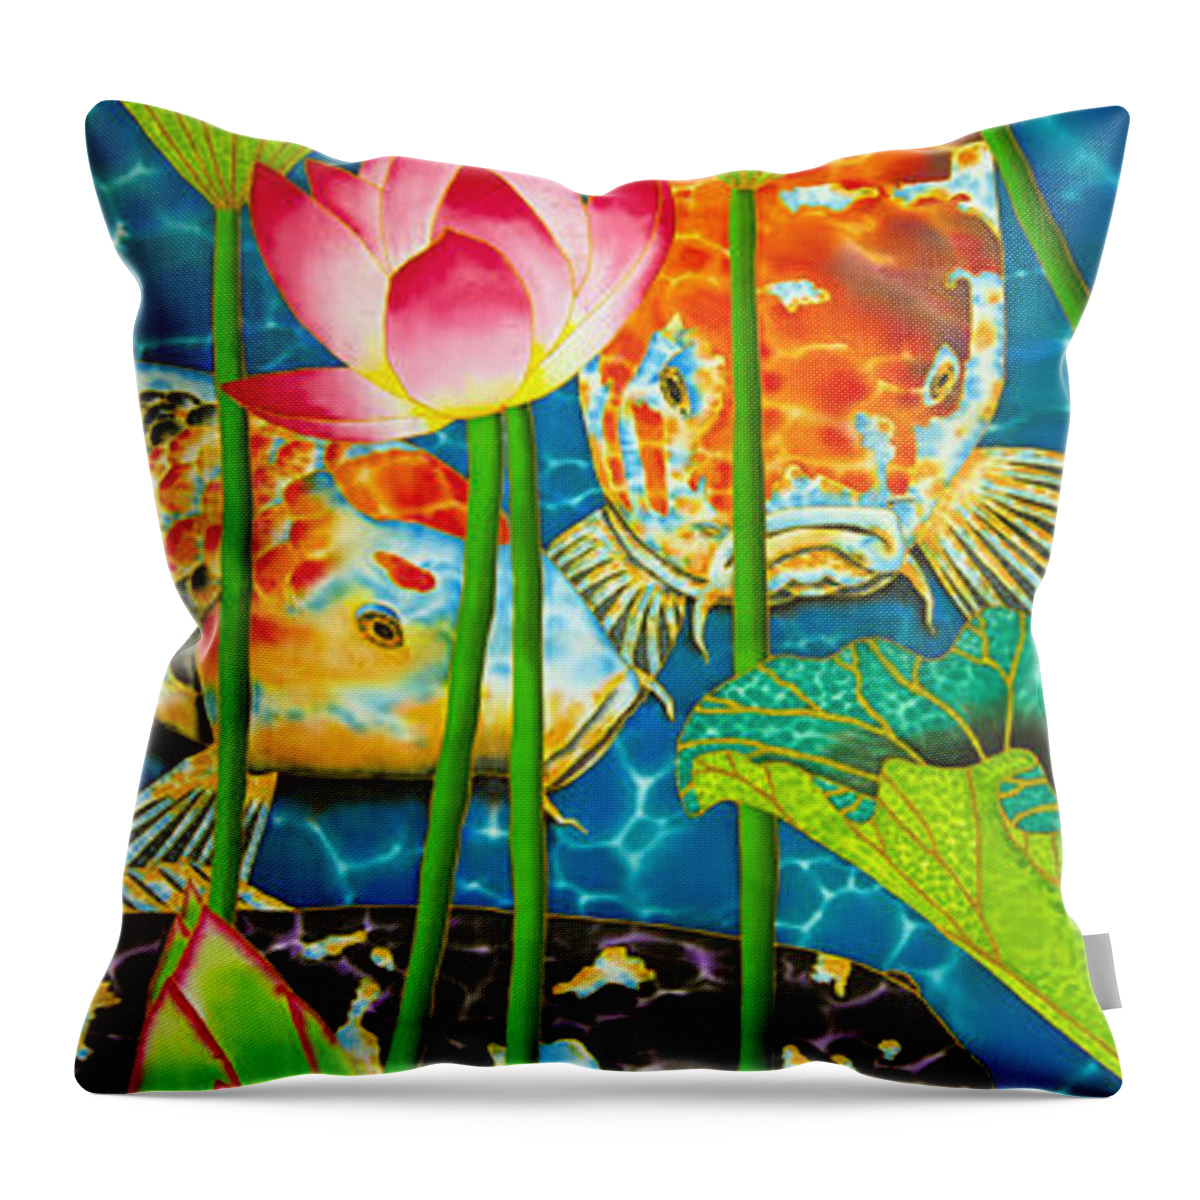 Lotus Pond Throw Pillow featuring the painting Koi by Daniel Jean-Baptiste